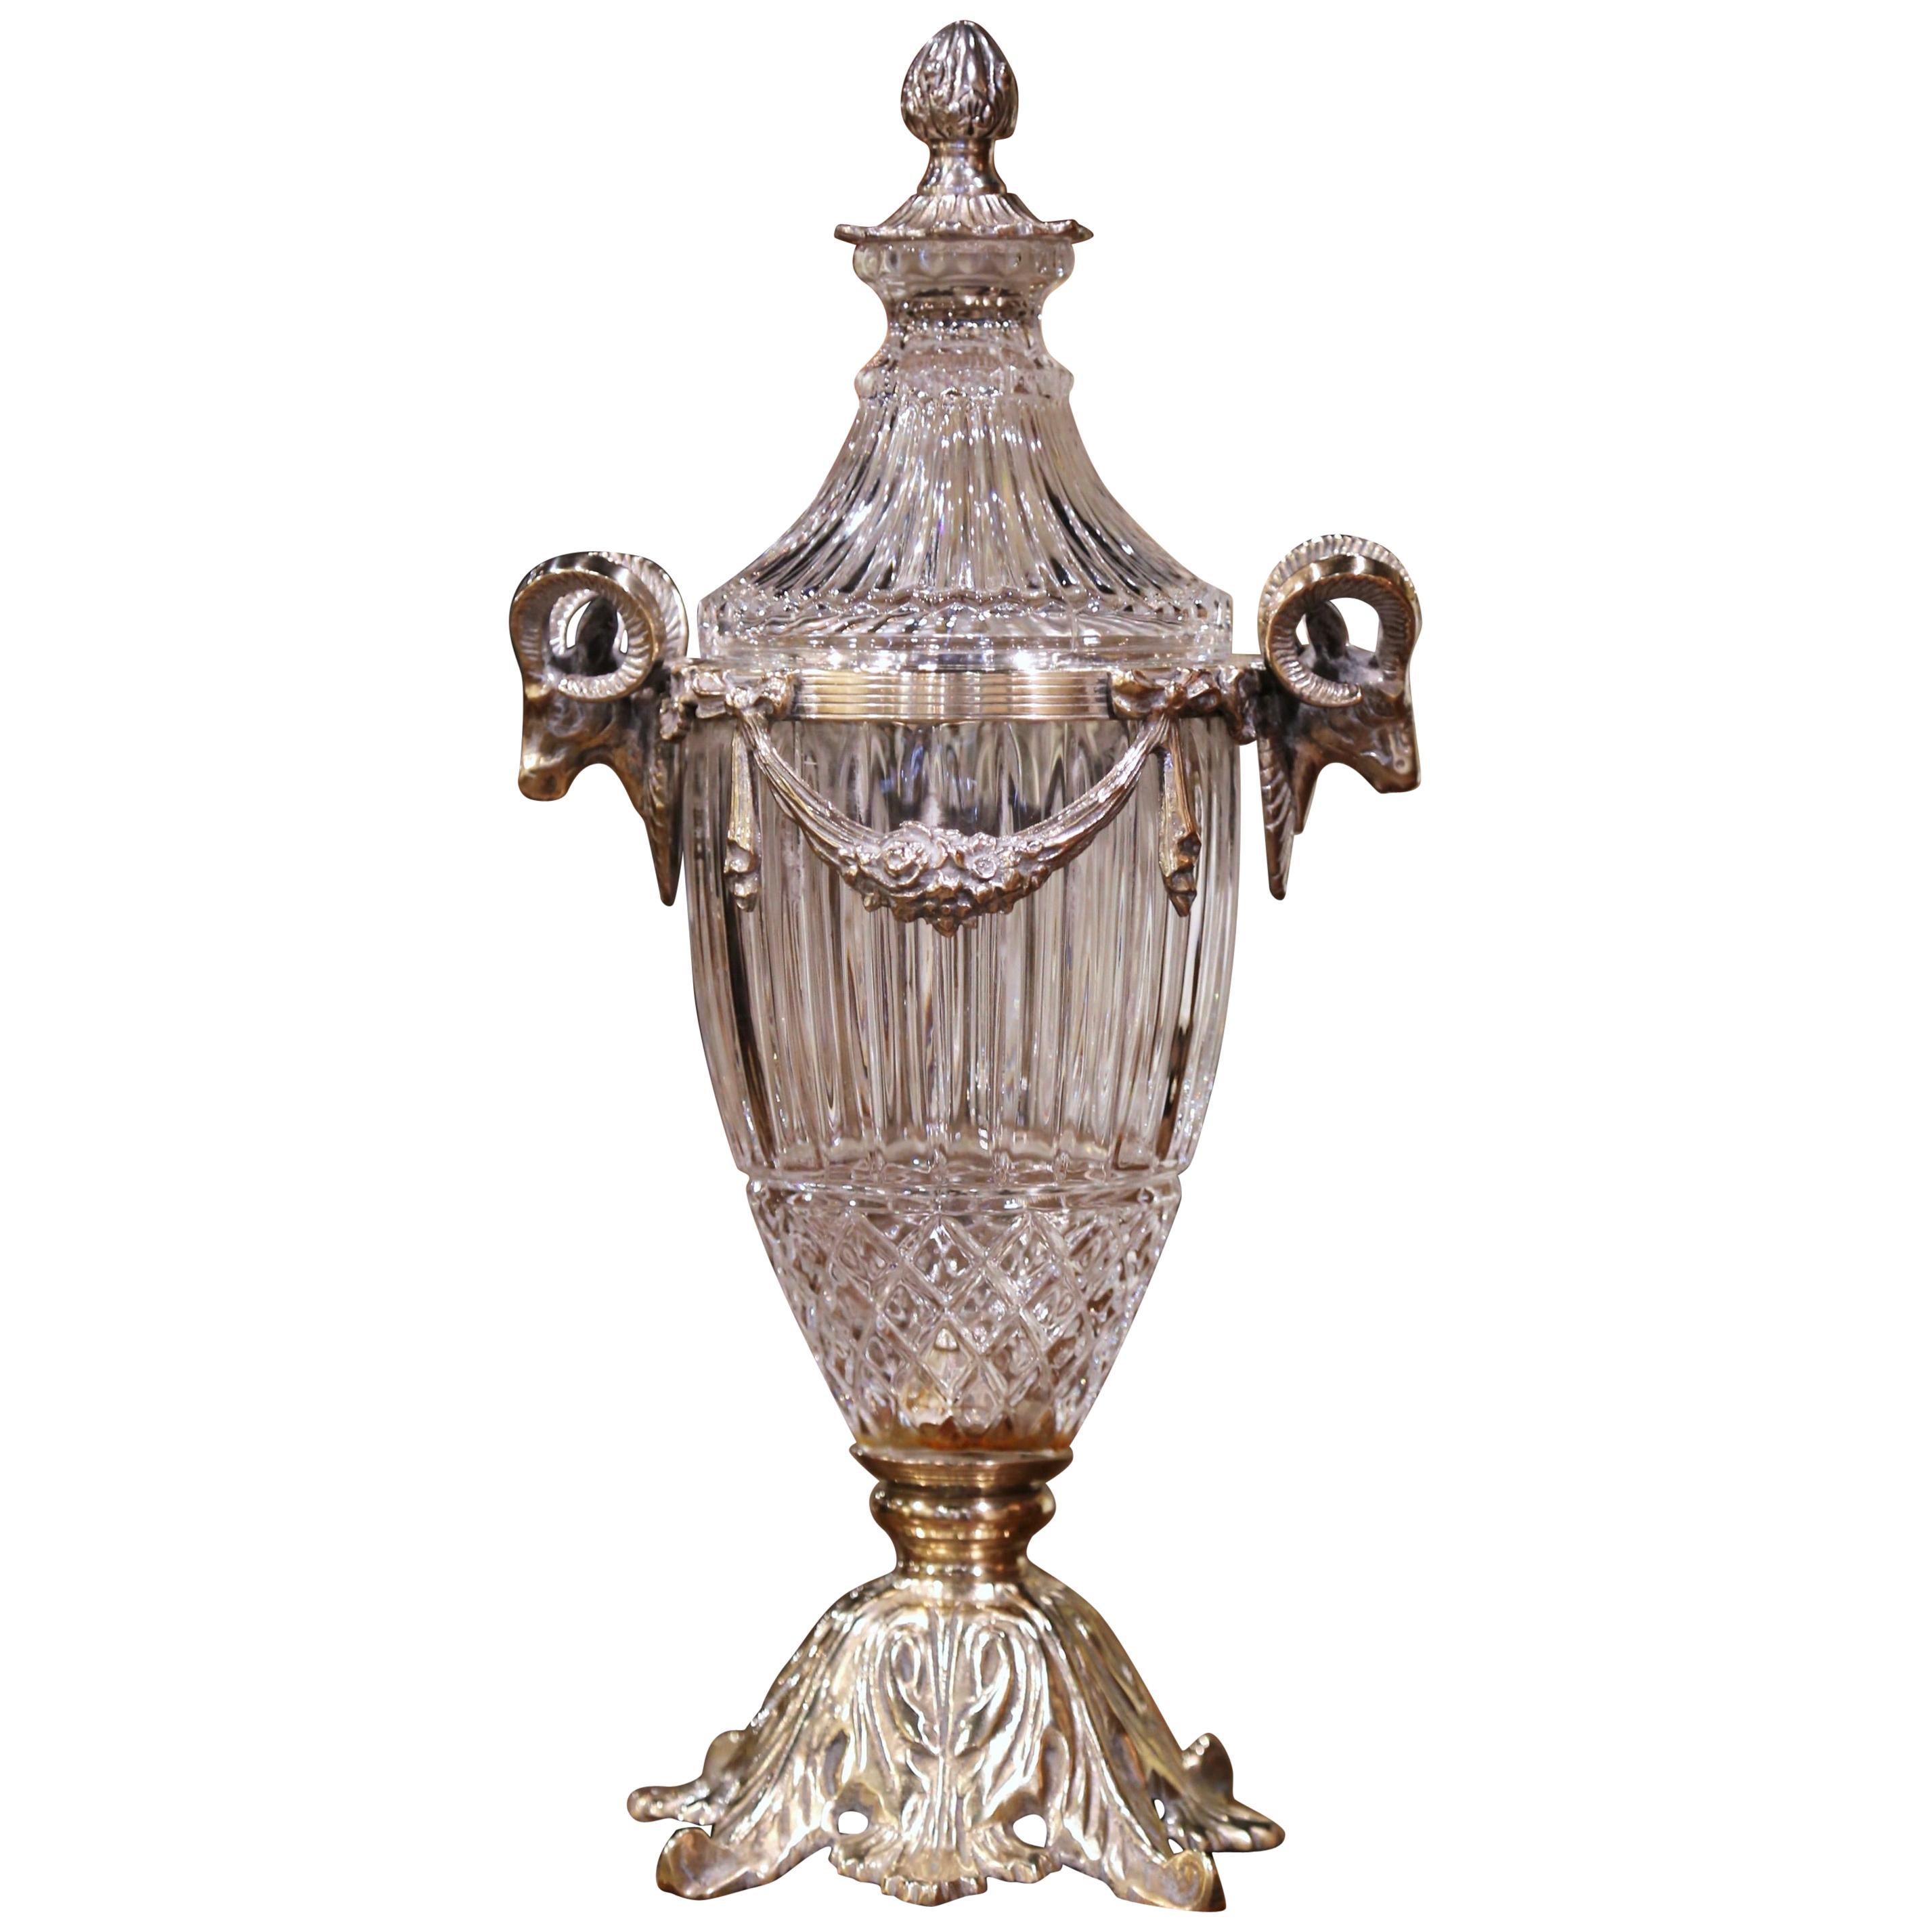 19th Century French Crystal and Silvered Bronze Cassolette Urn with Ram Decor